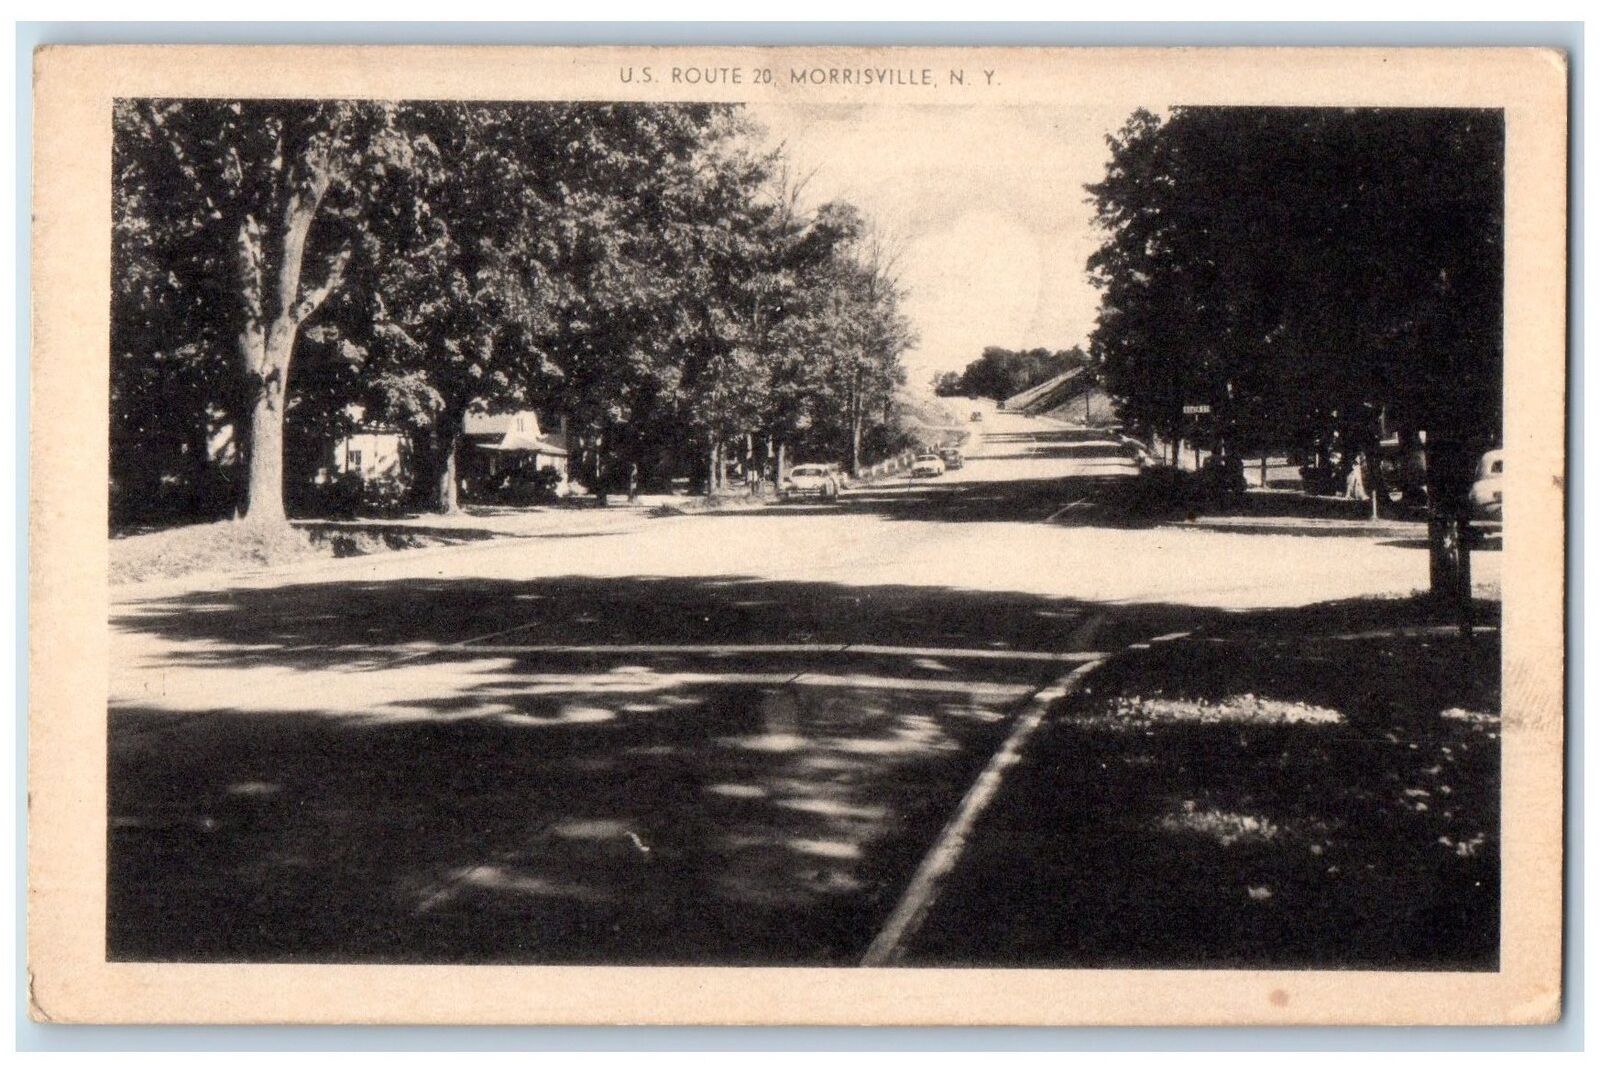 1955 U.S. Route 20, Cars Street View Morrisville New York NY Vintage Postcard